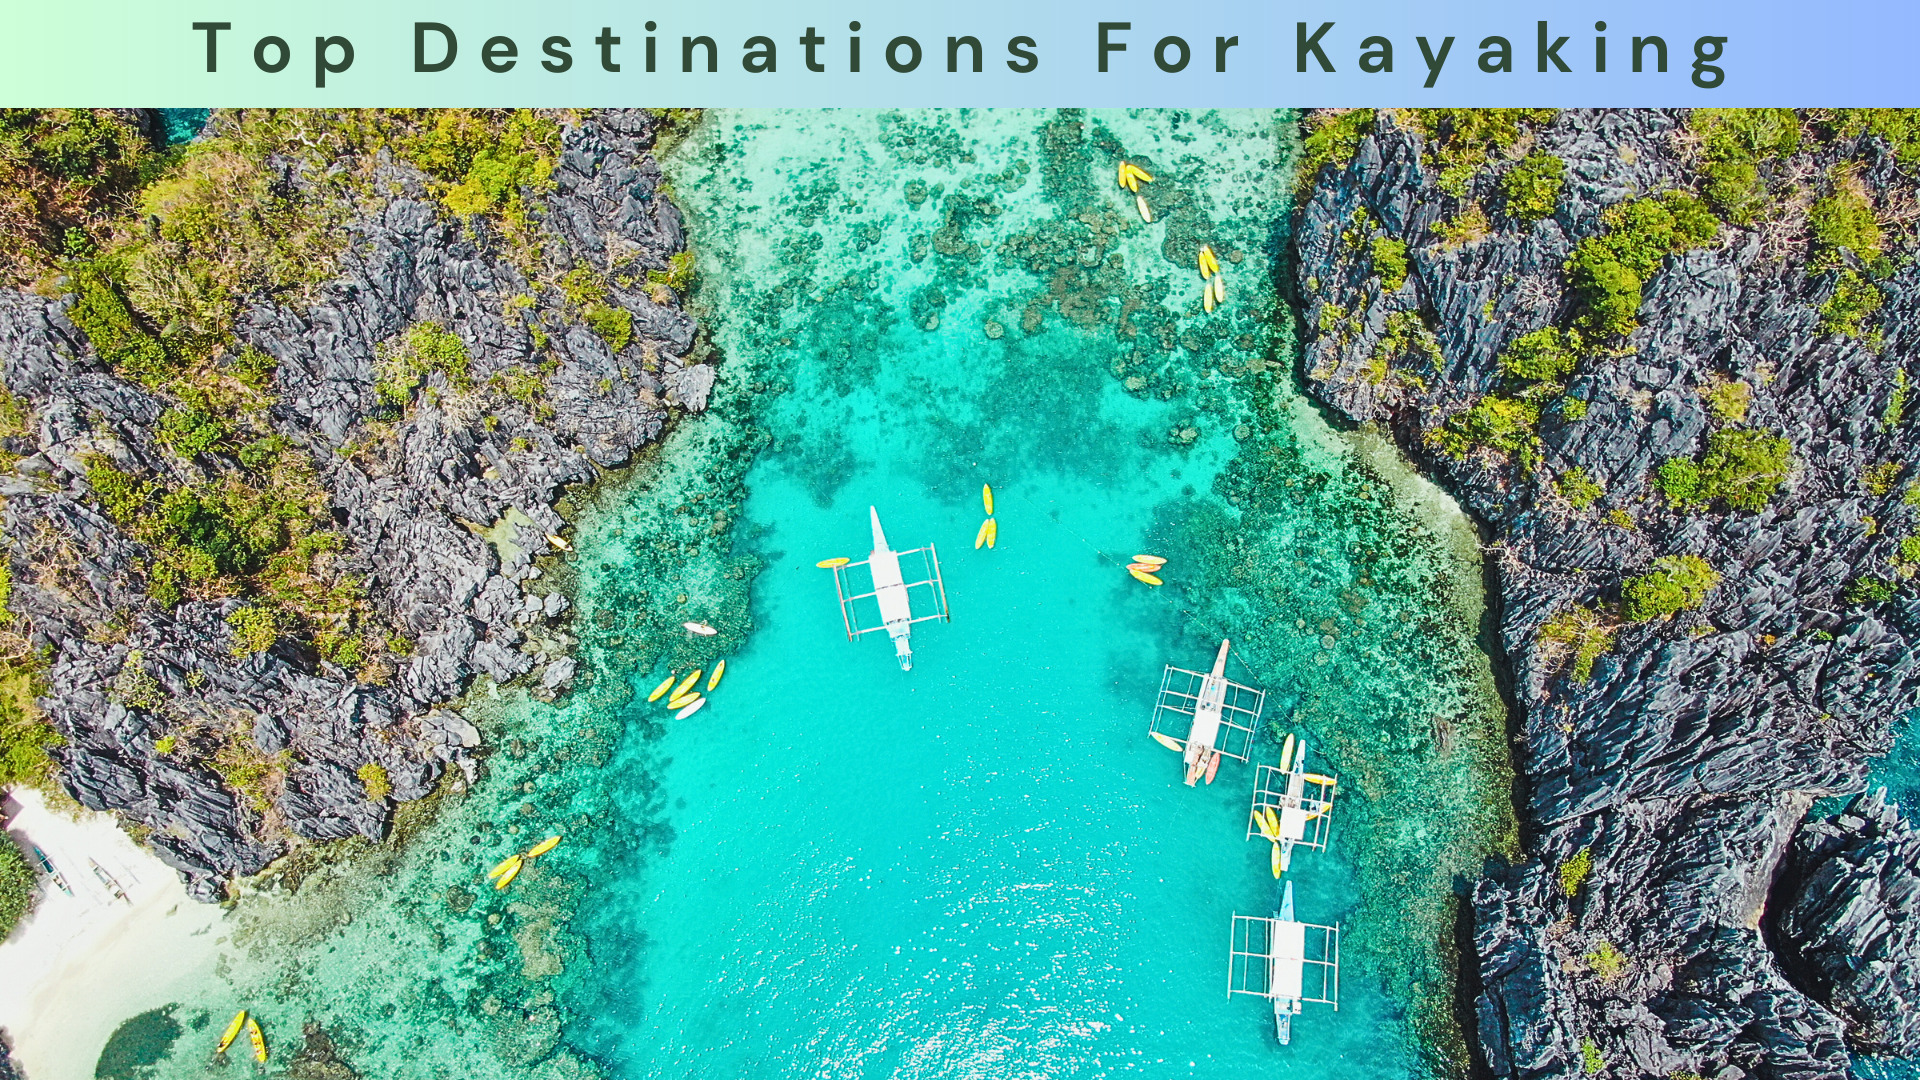 Top Destinations for Kayaking in the World